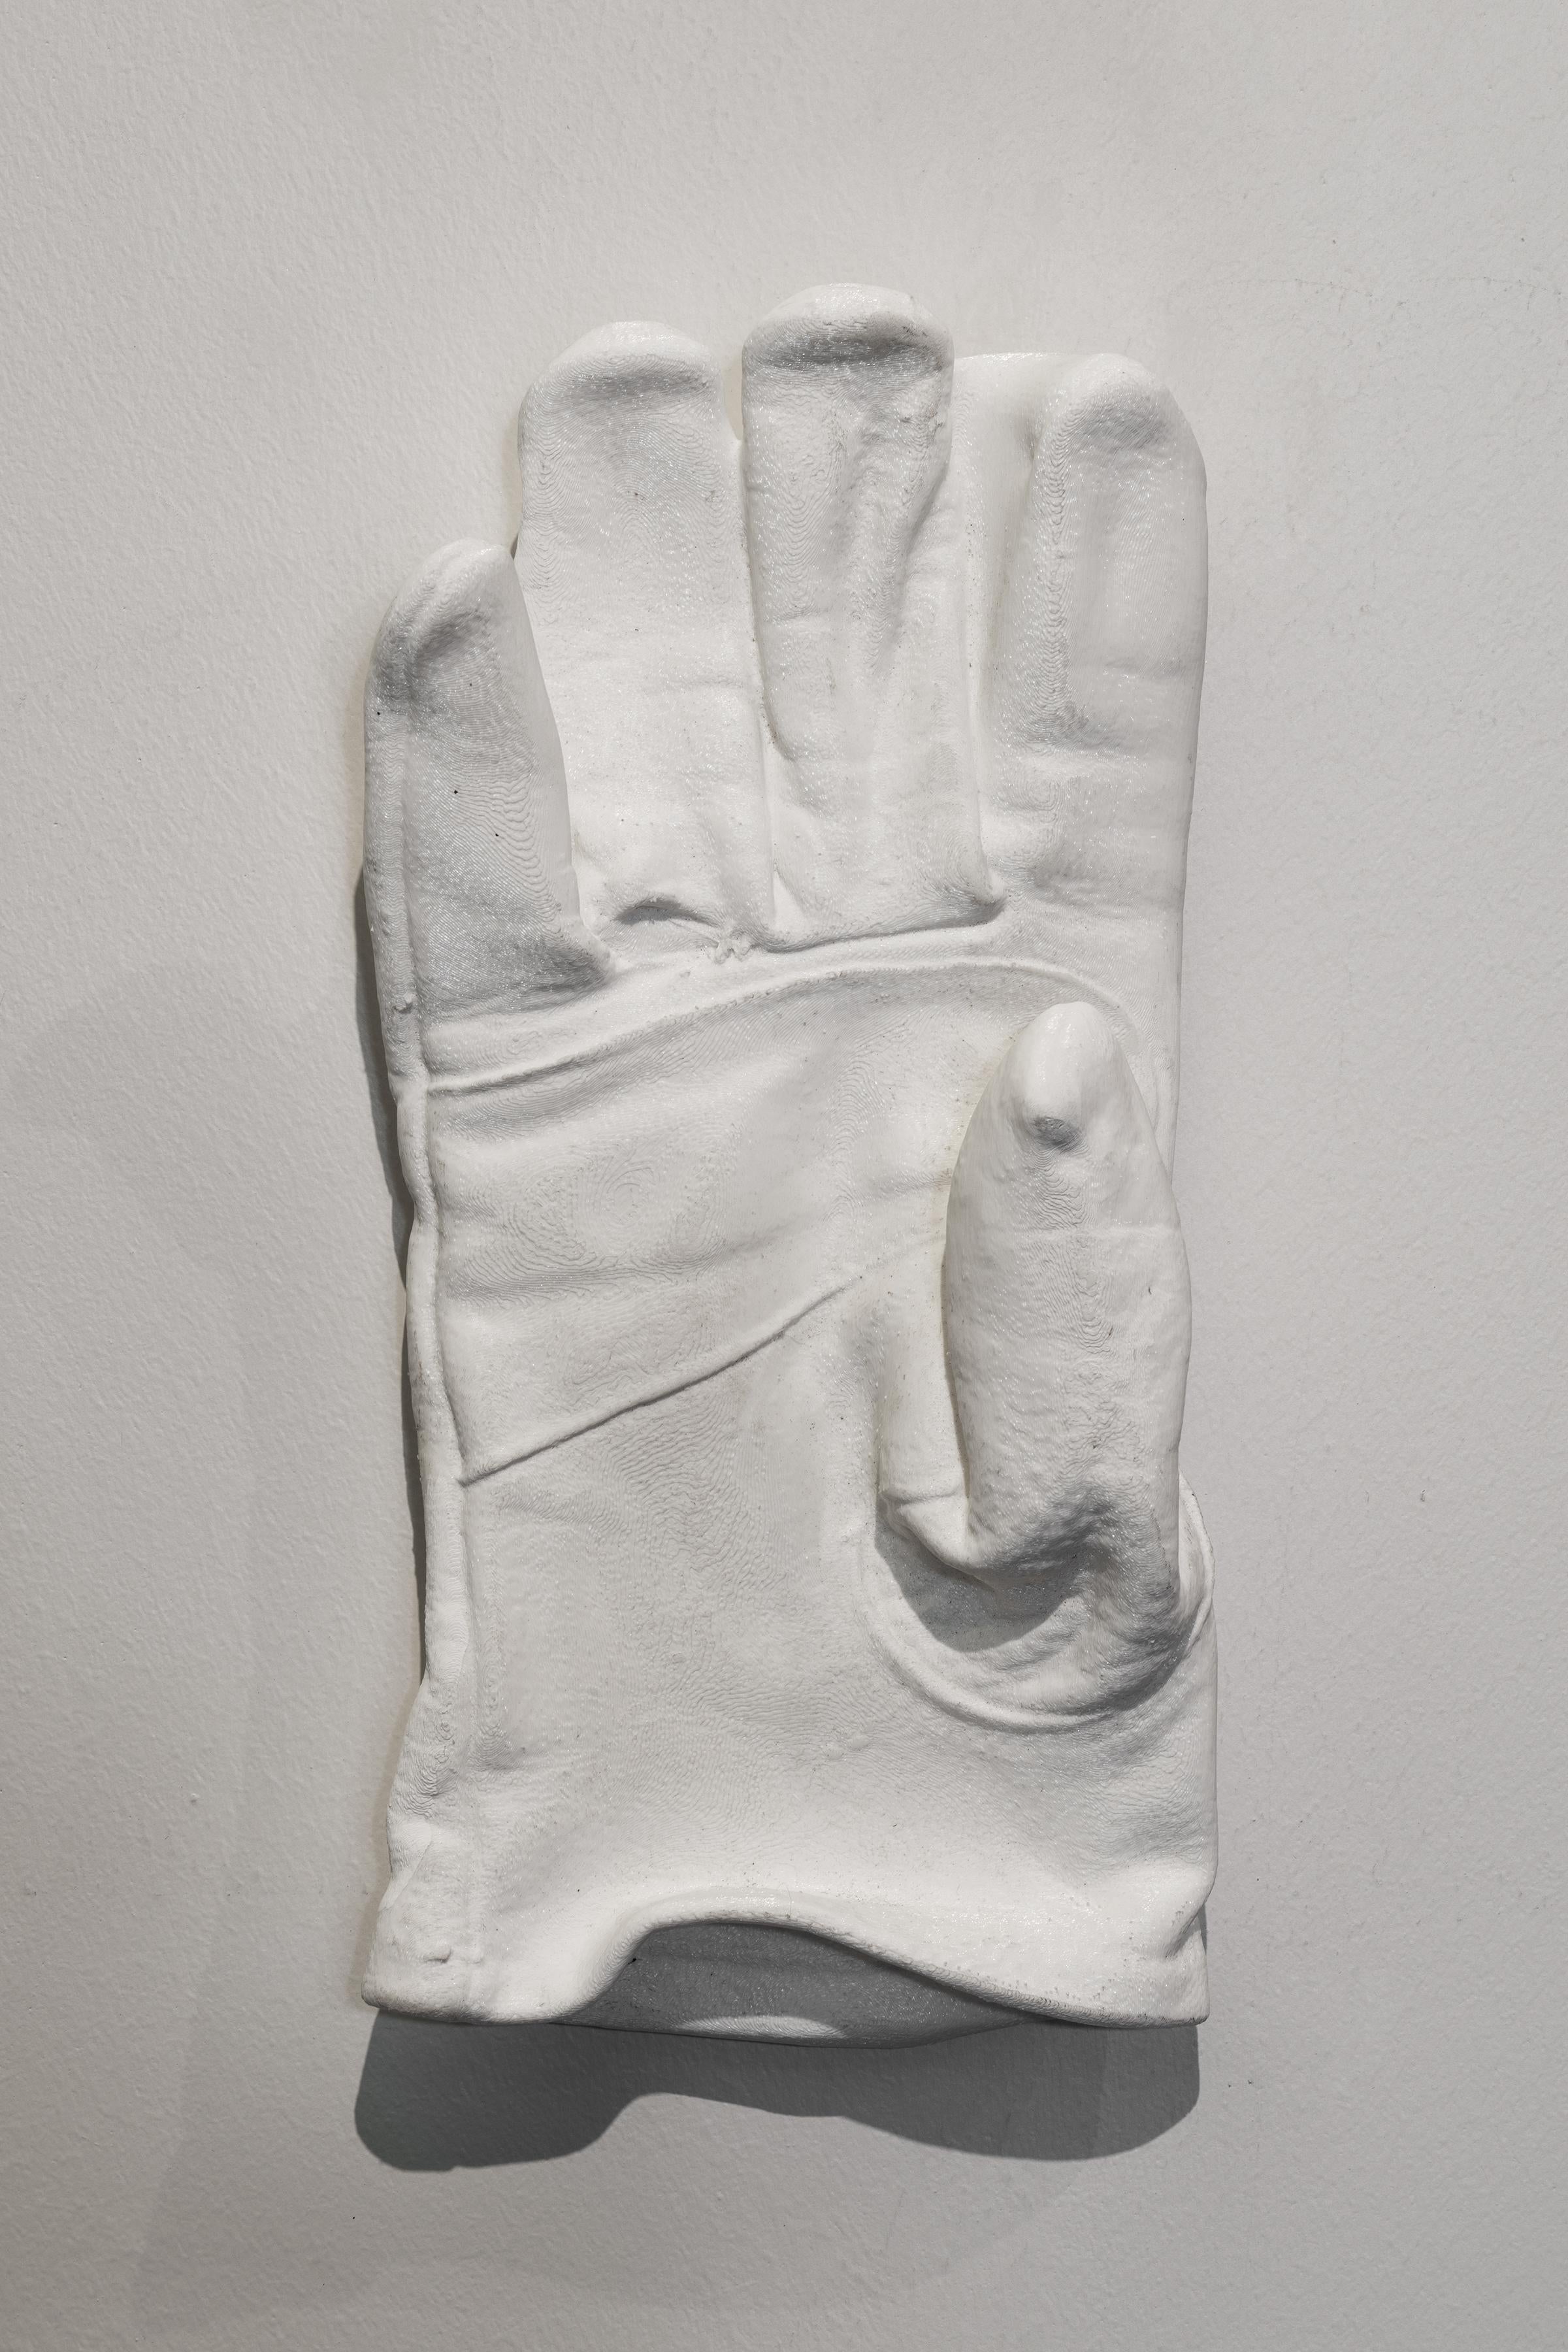 ST. ROPER - Sculpture of White Glove, 3D Scanned and Printed